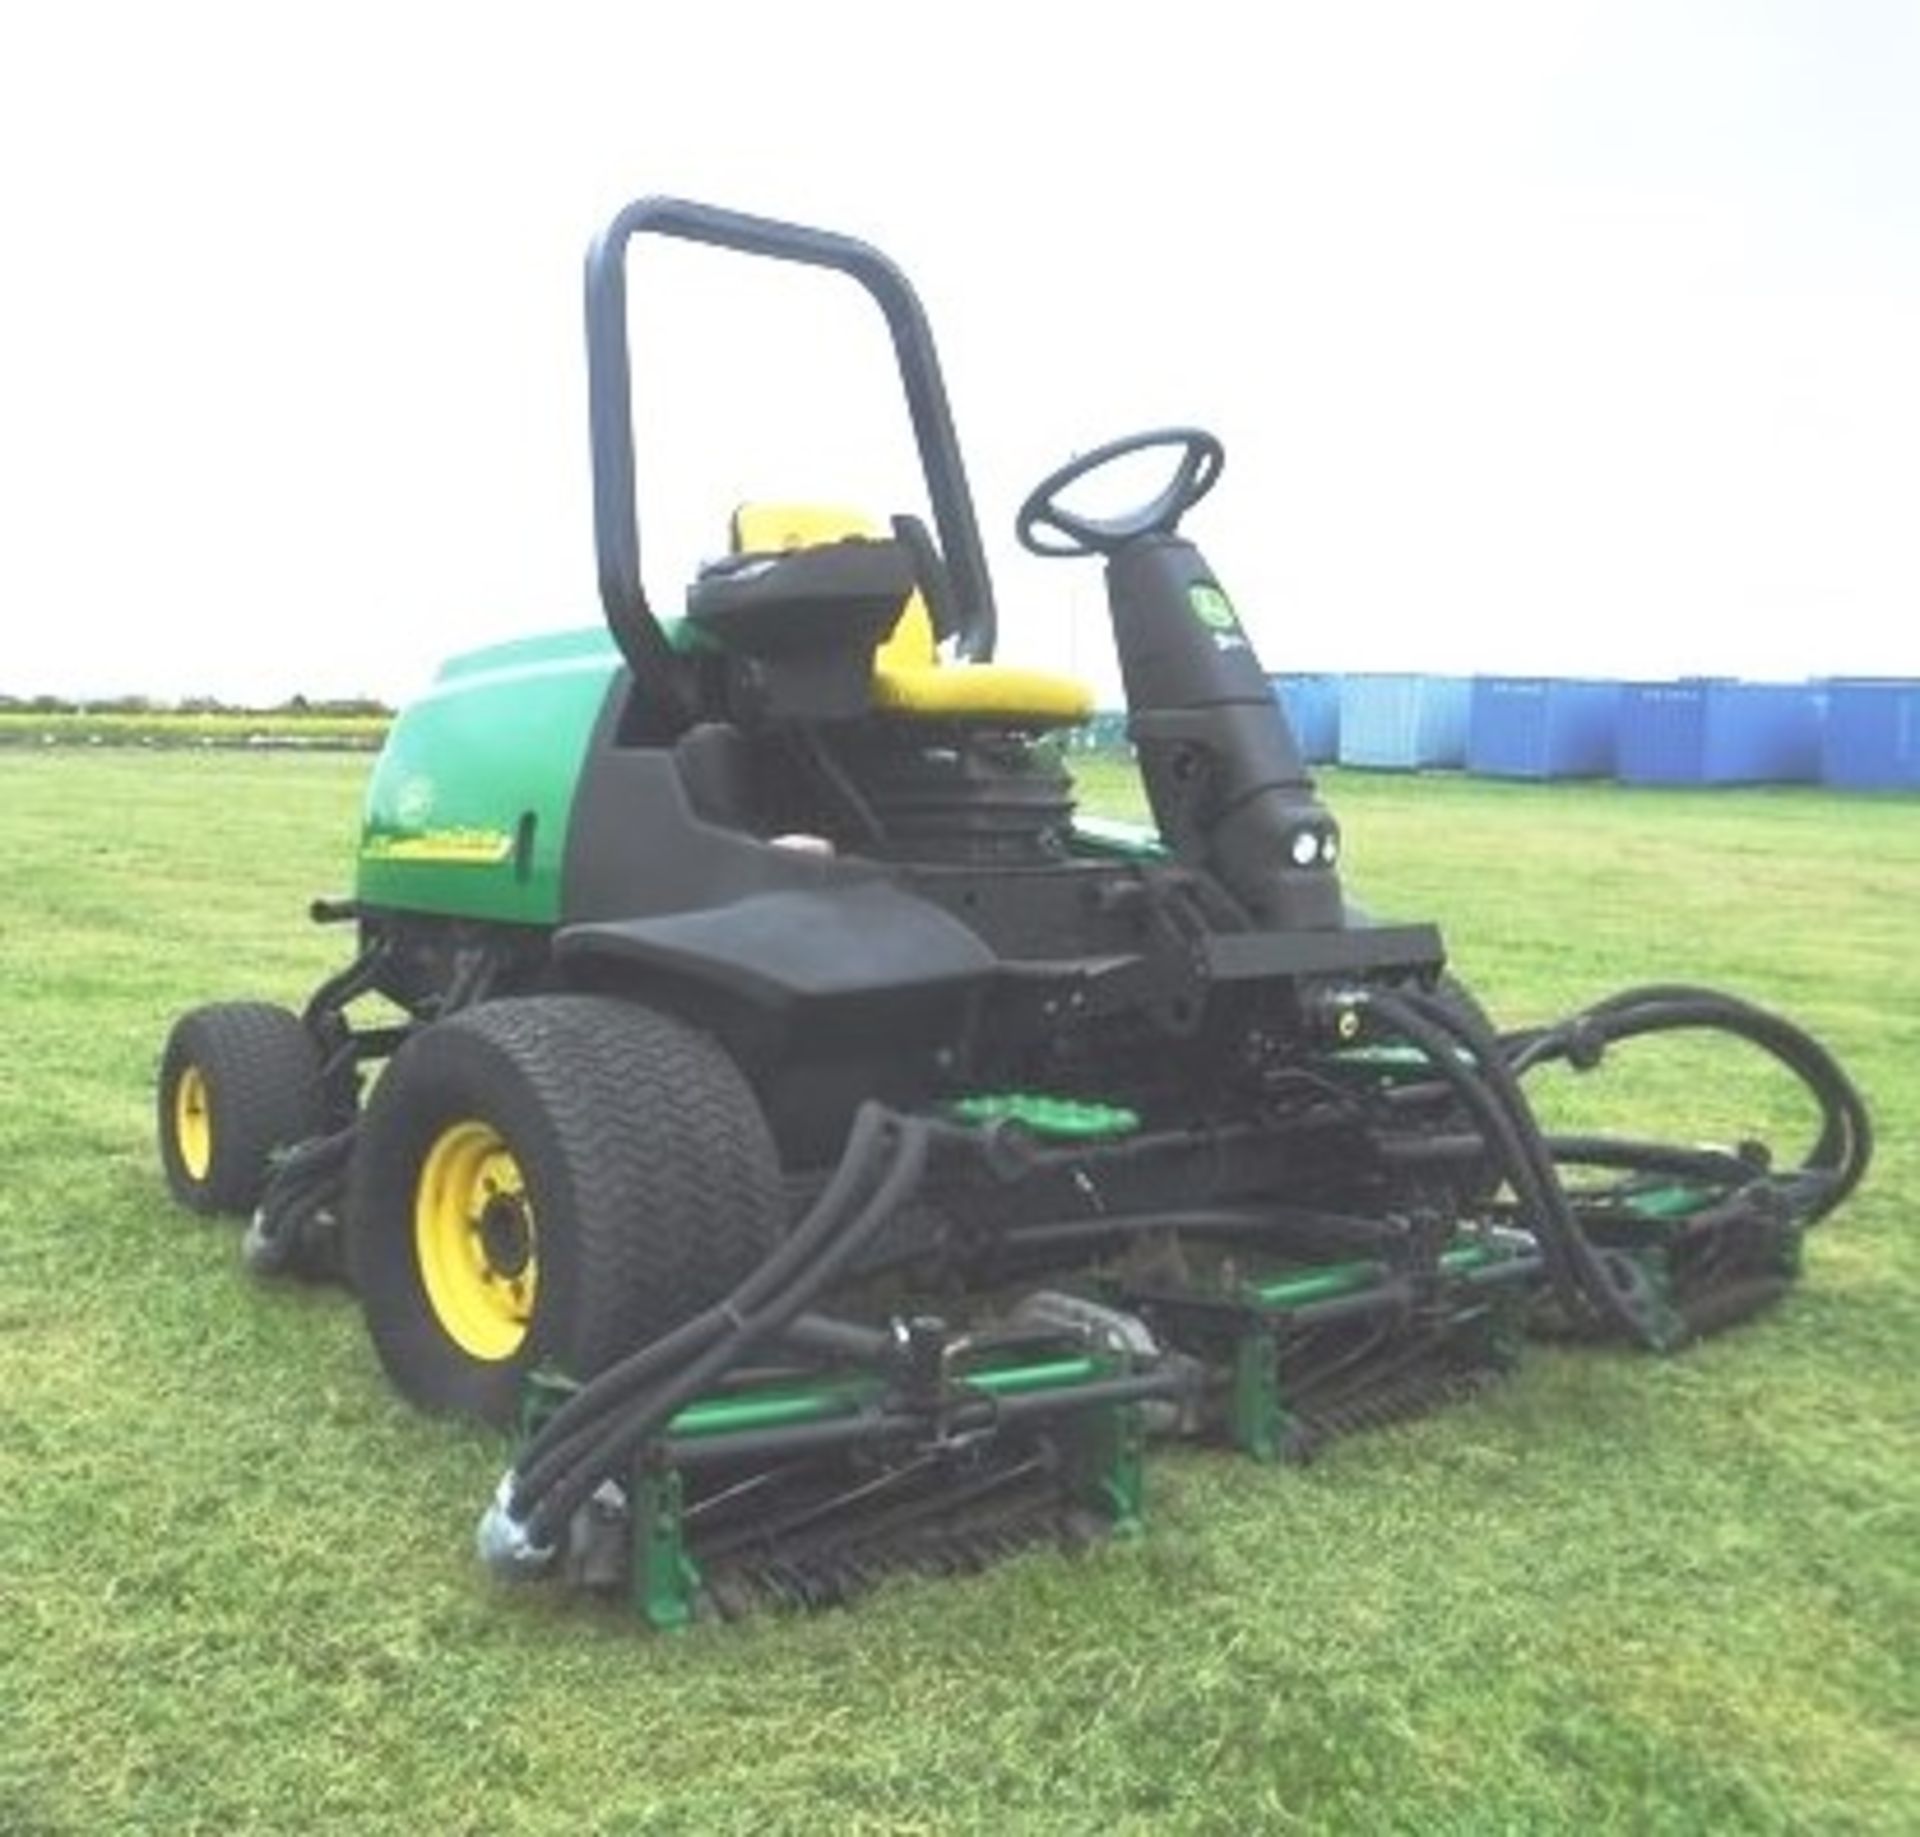 JOHN DEERE 3233C 3 gang out front ride on mower s/n TC32335C040226. 2601hrs (not verified). - Image 5 of 11